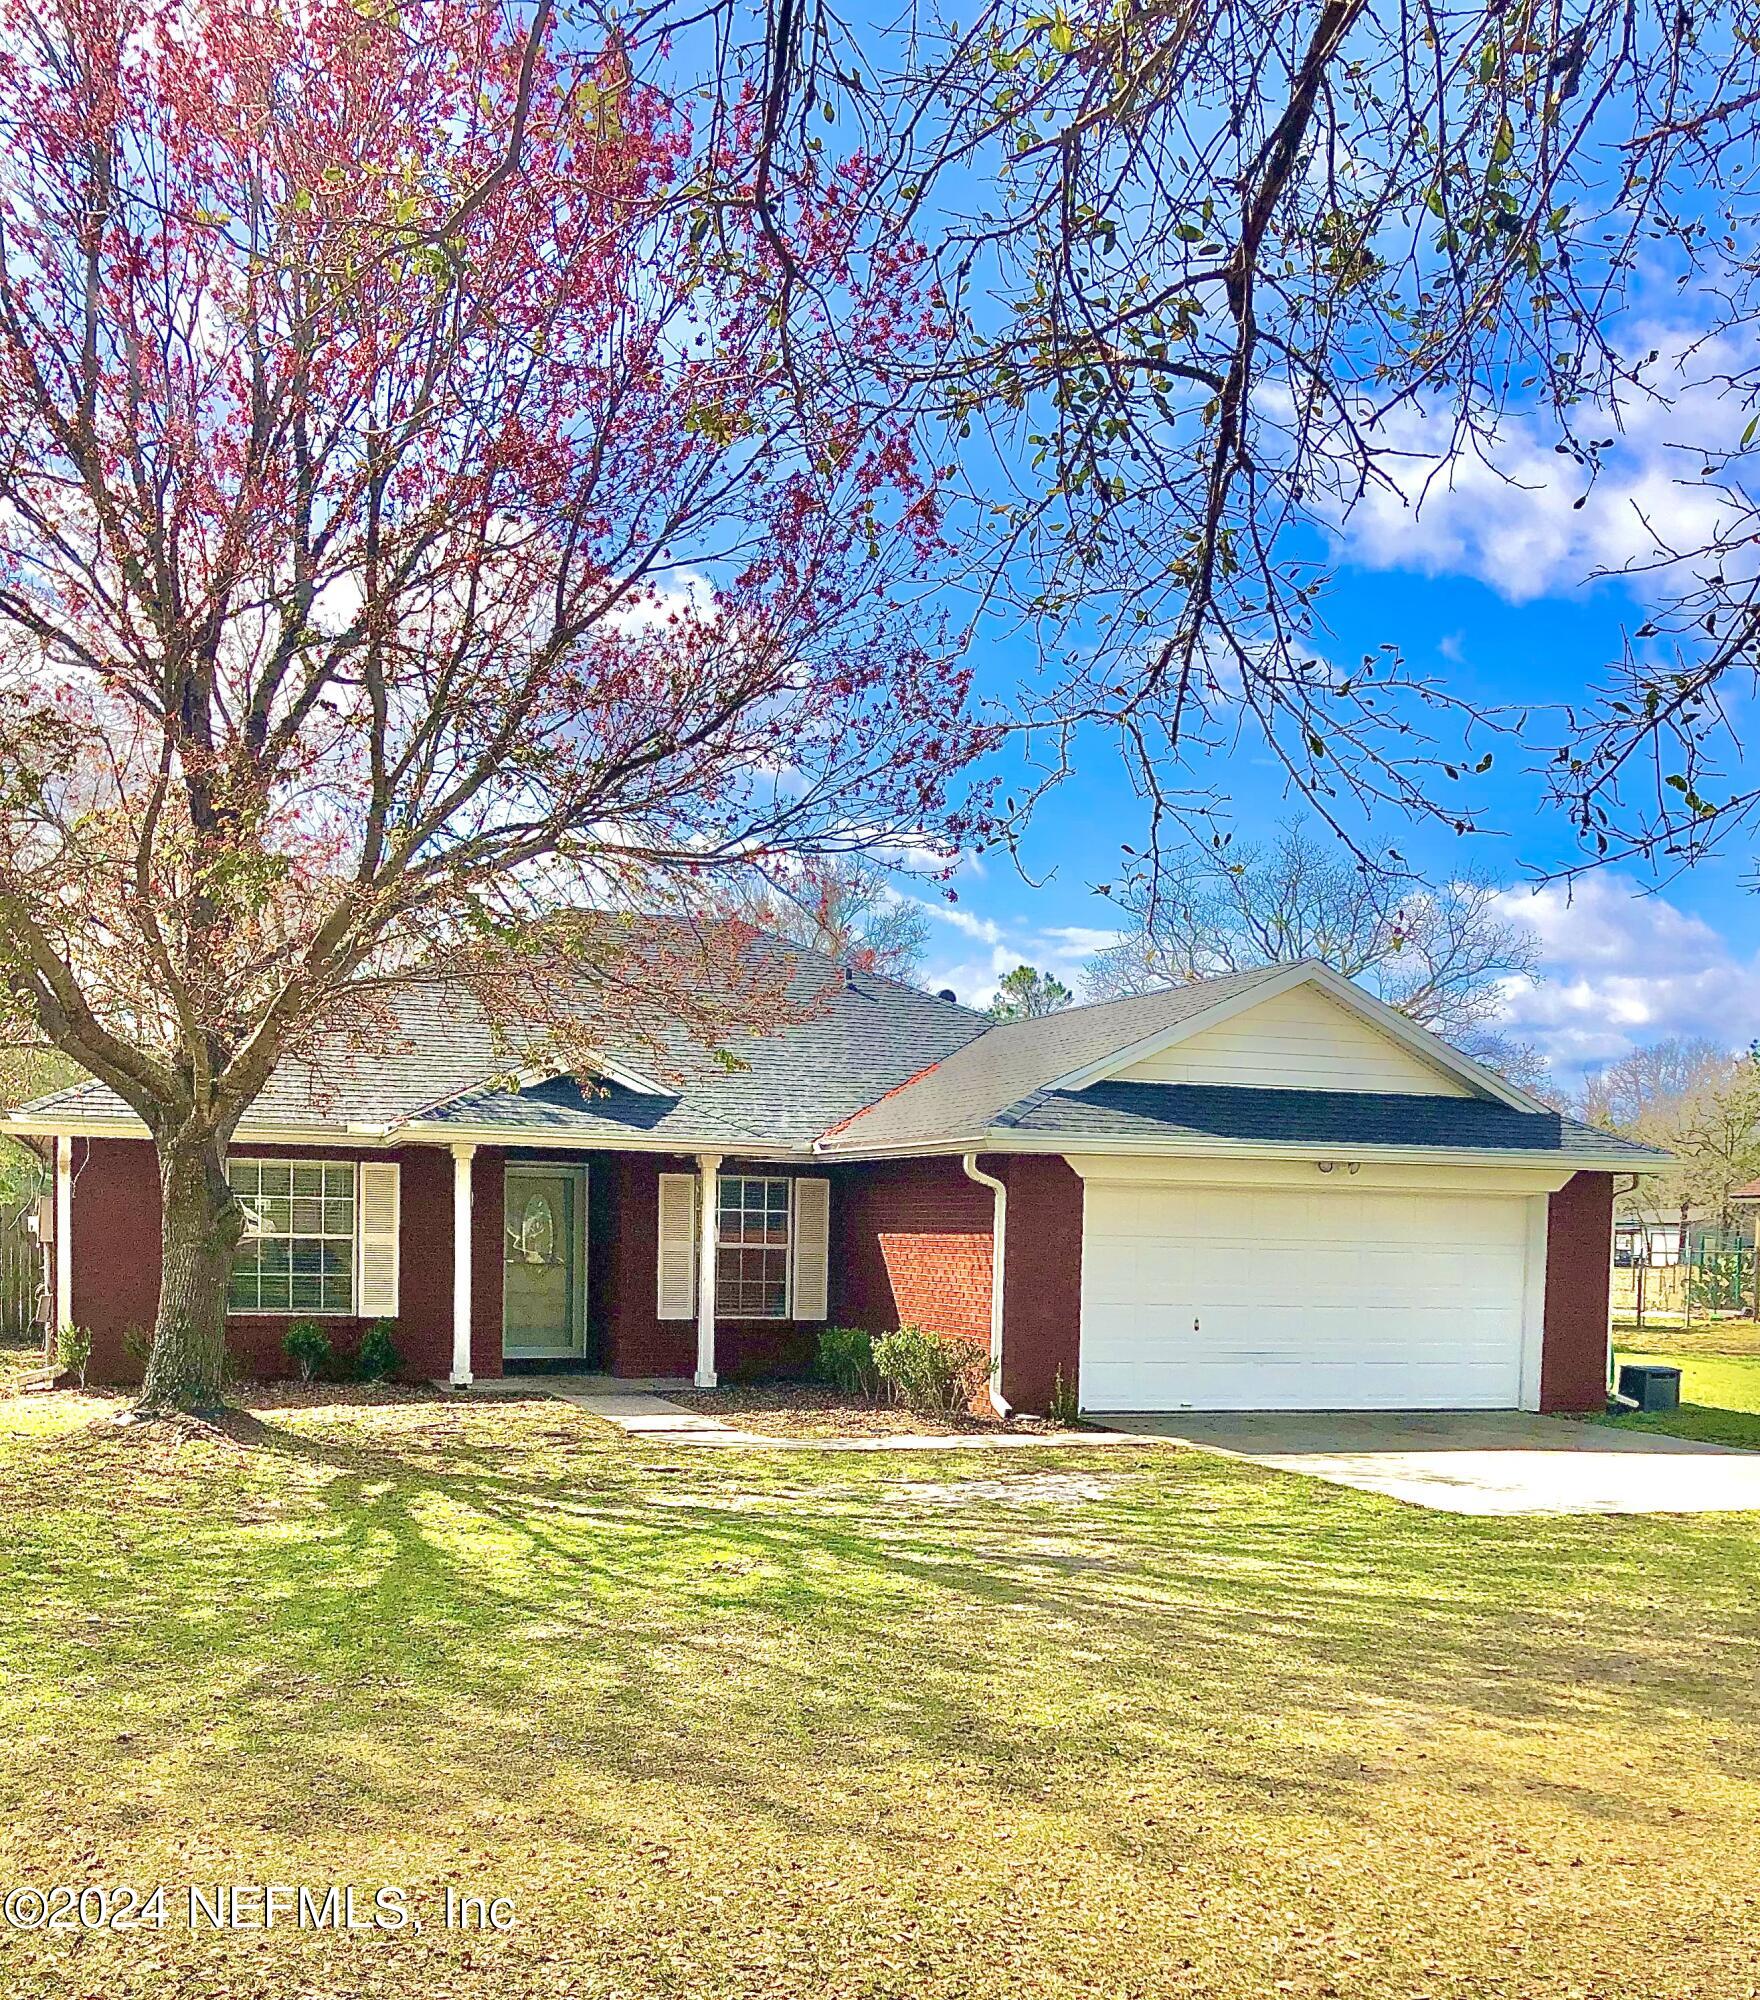 Bryceville, FL home for sale located at 9515 FORD Road, Bryceville, FL 32009